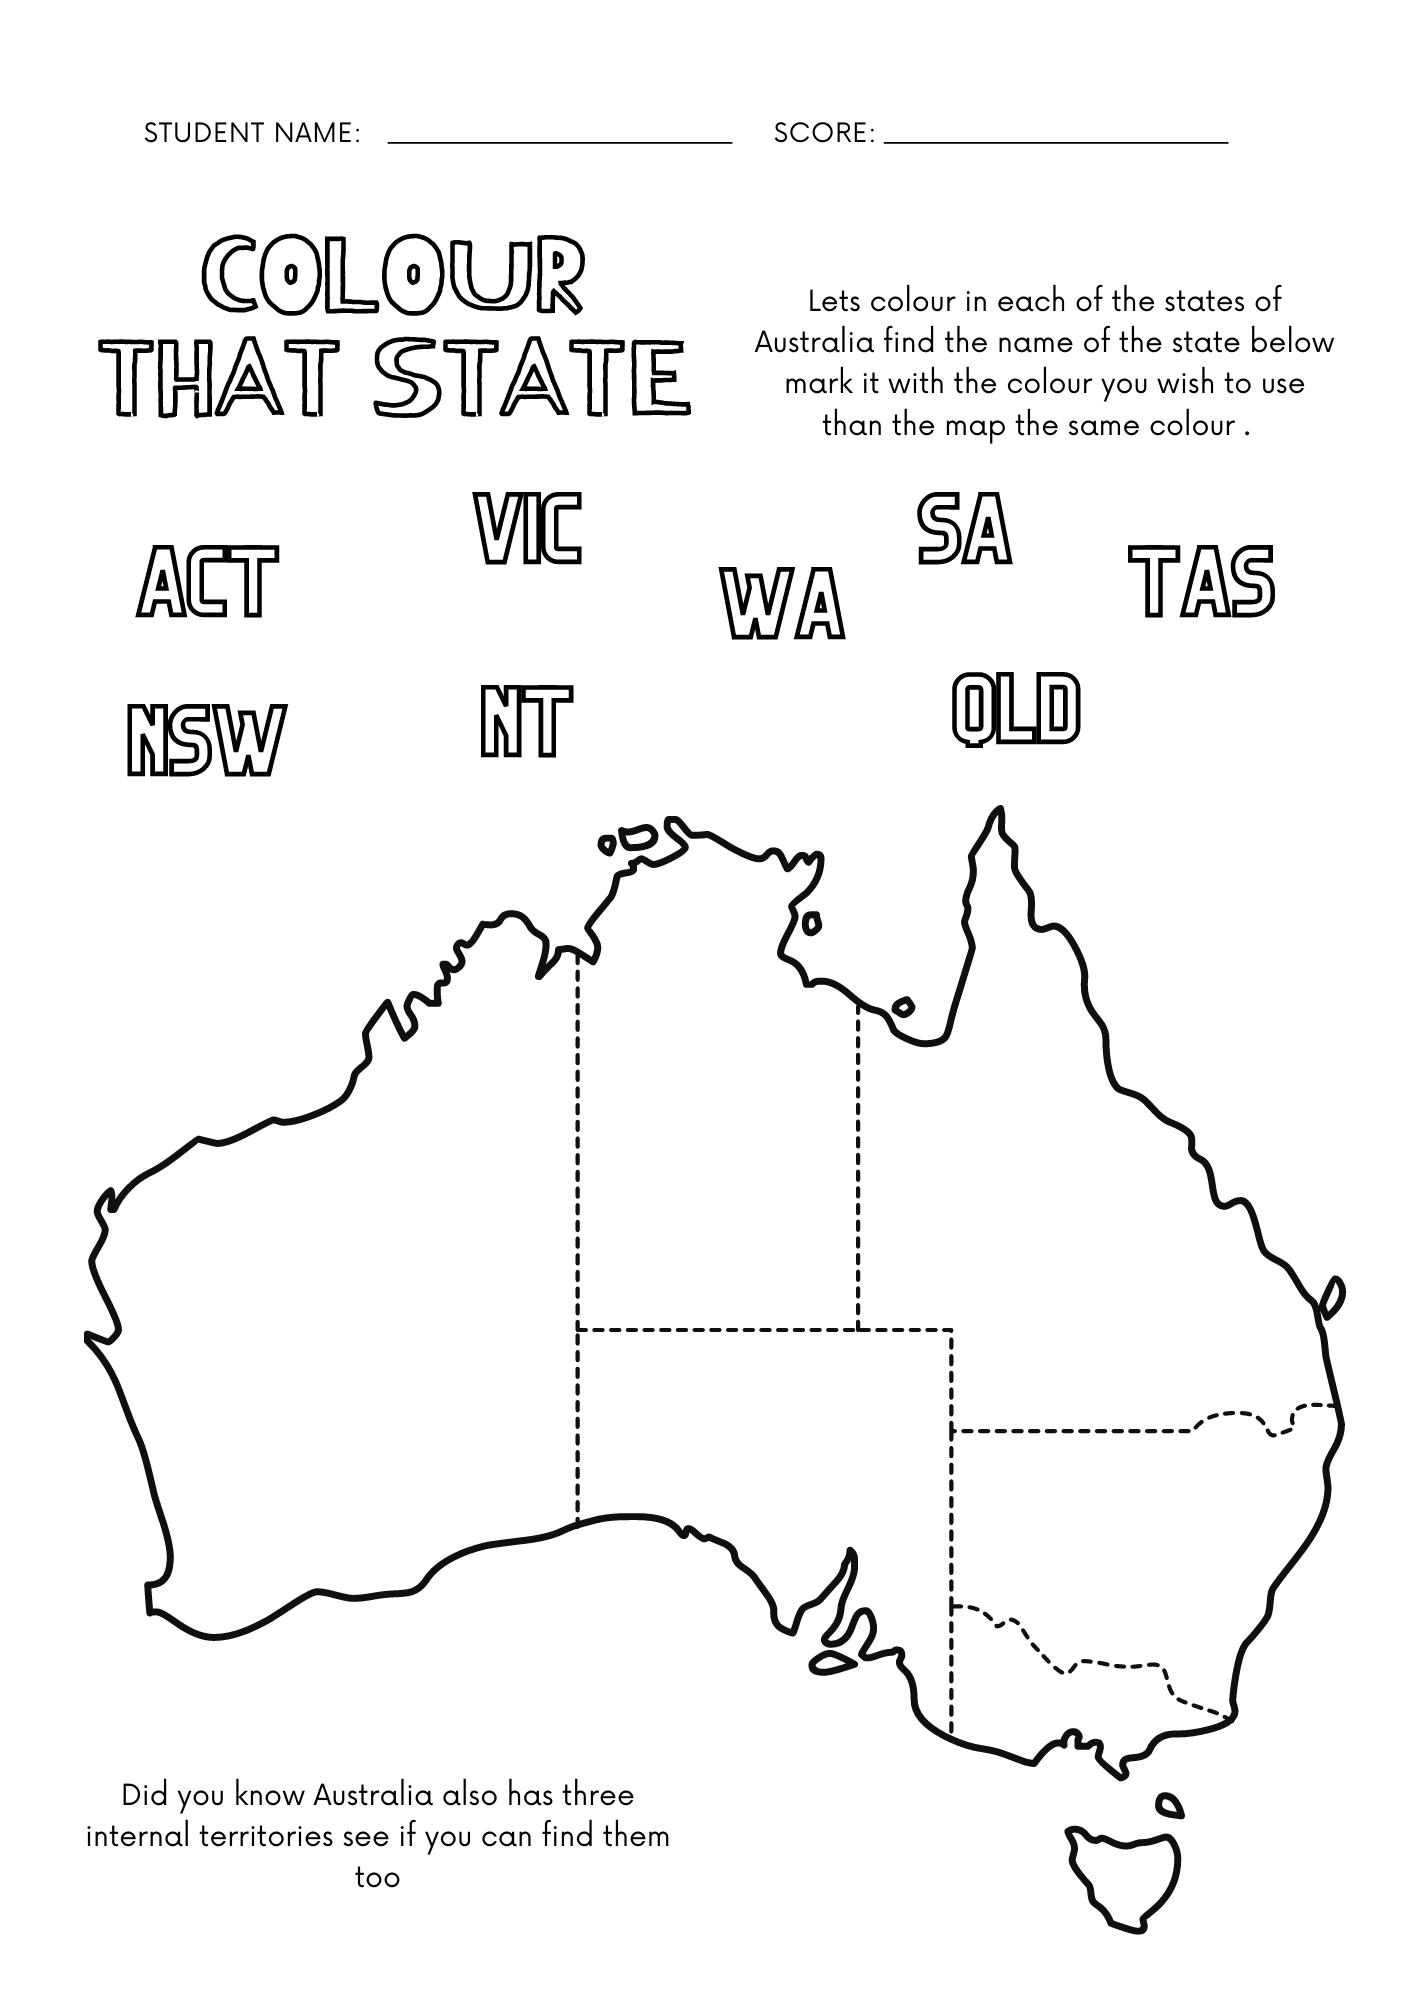 colour-that-state-australia-colouring-activity-printable-worksheet-help-my-kids-are-bored